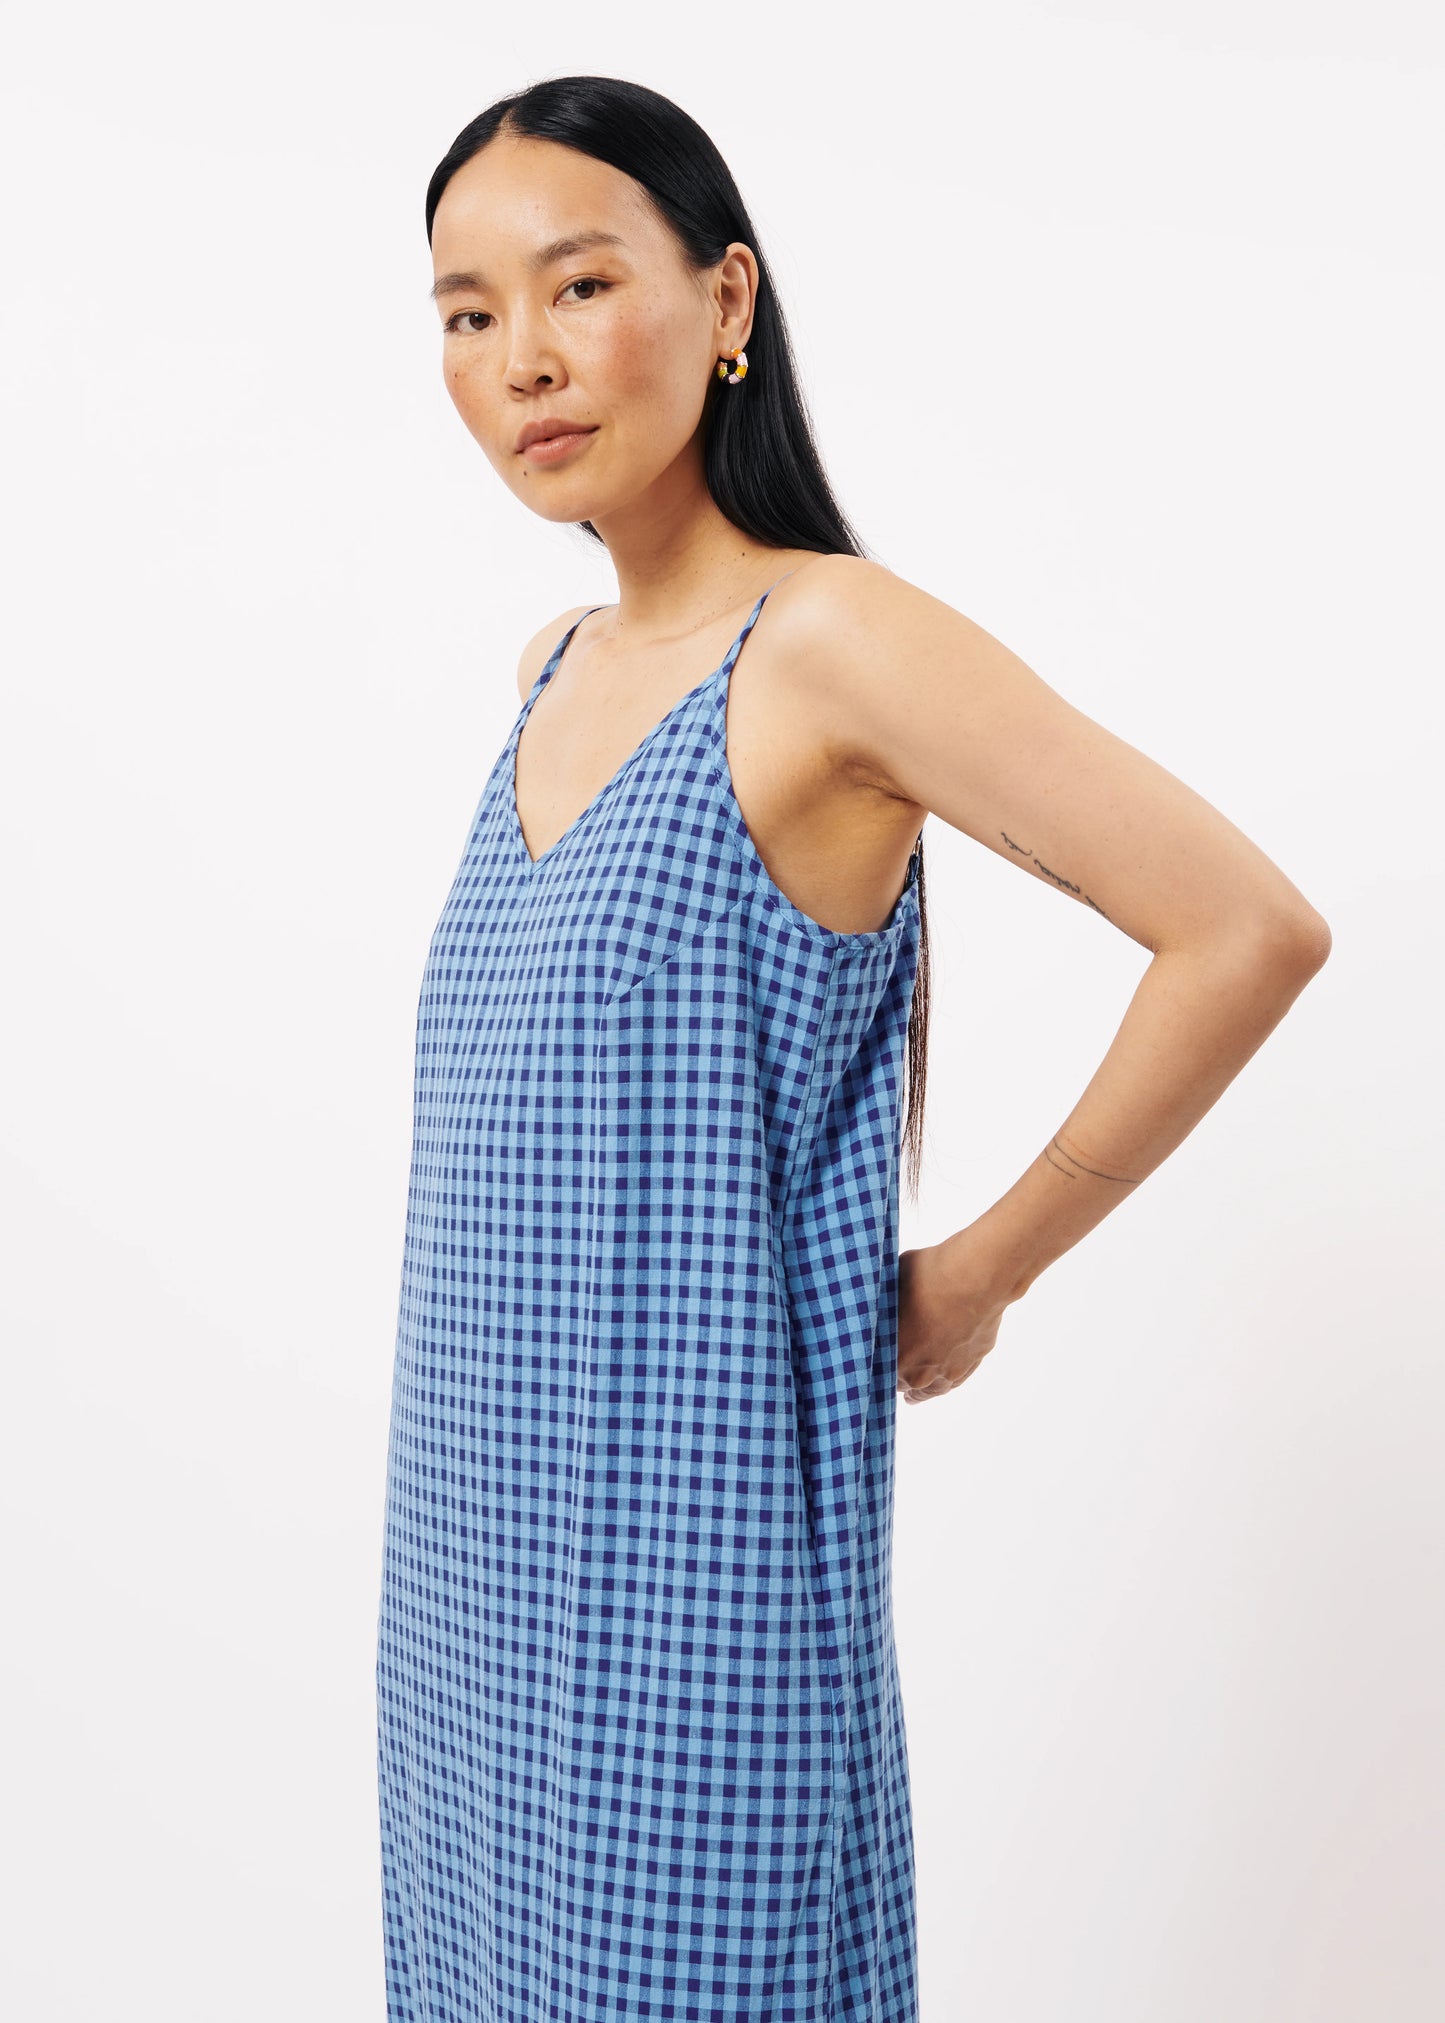 The FRNCH Neha Dress features a stylish Vichy gingham pattern in two tone blue and a straight, form-flattering cut, pockets and thin straps. Perfect for an effortless and chic look while out and about in town, day or night.